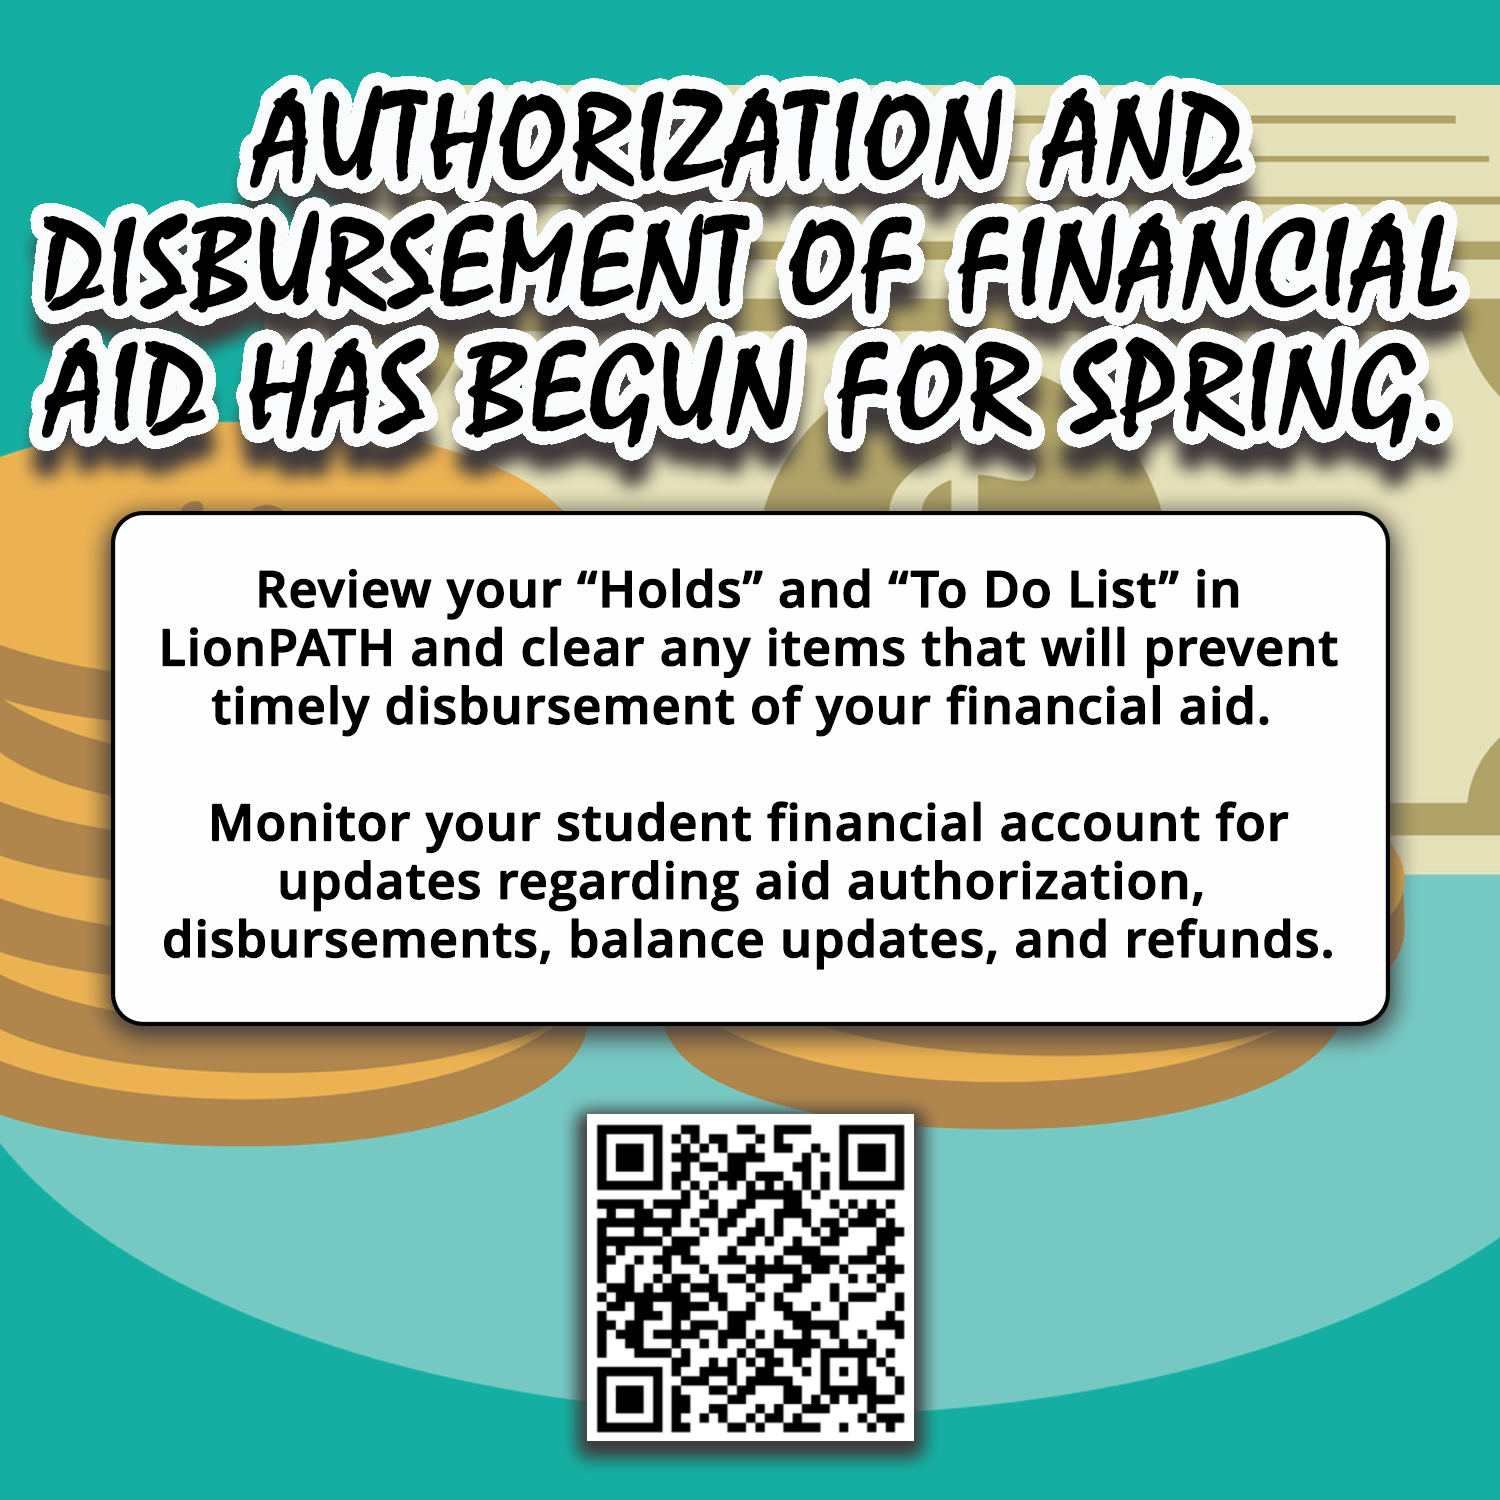 Spring Financial AId Authorization and Disbursement. Image of money.